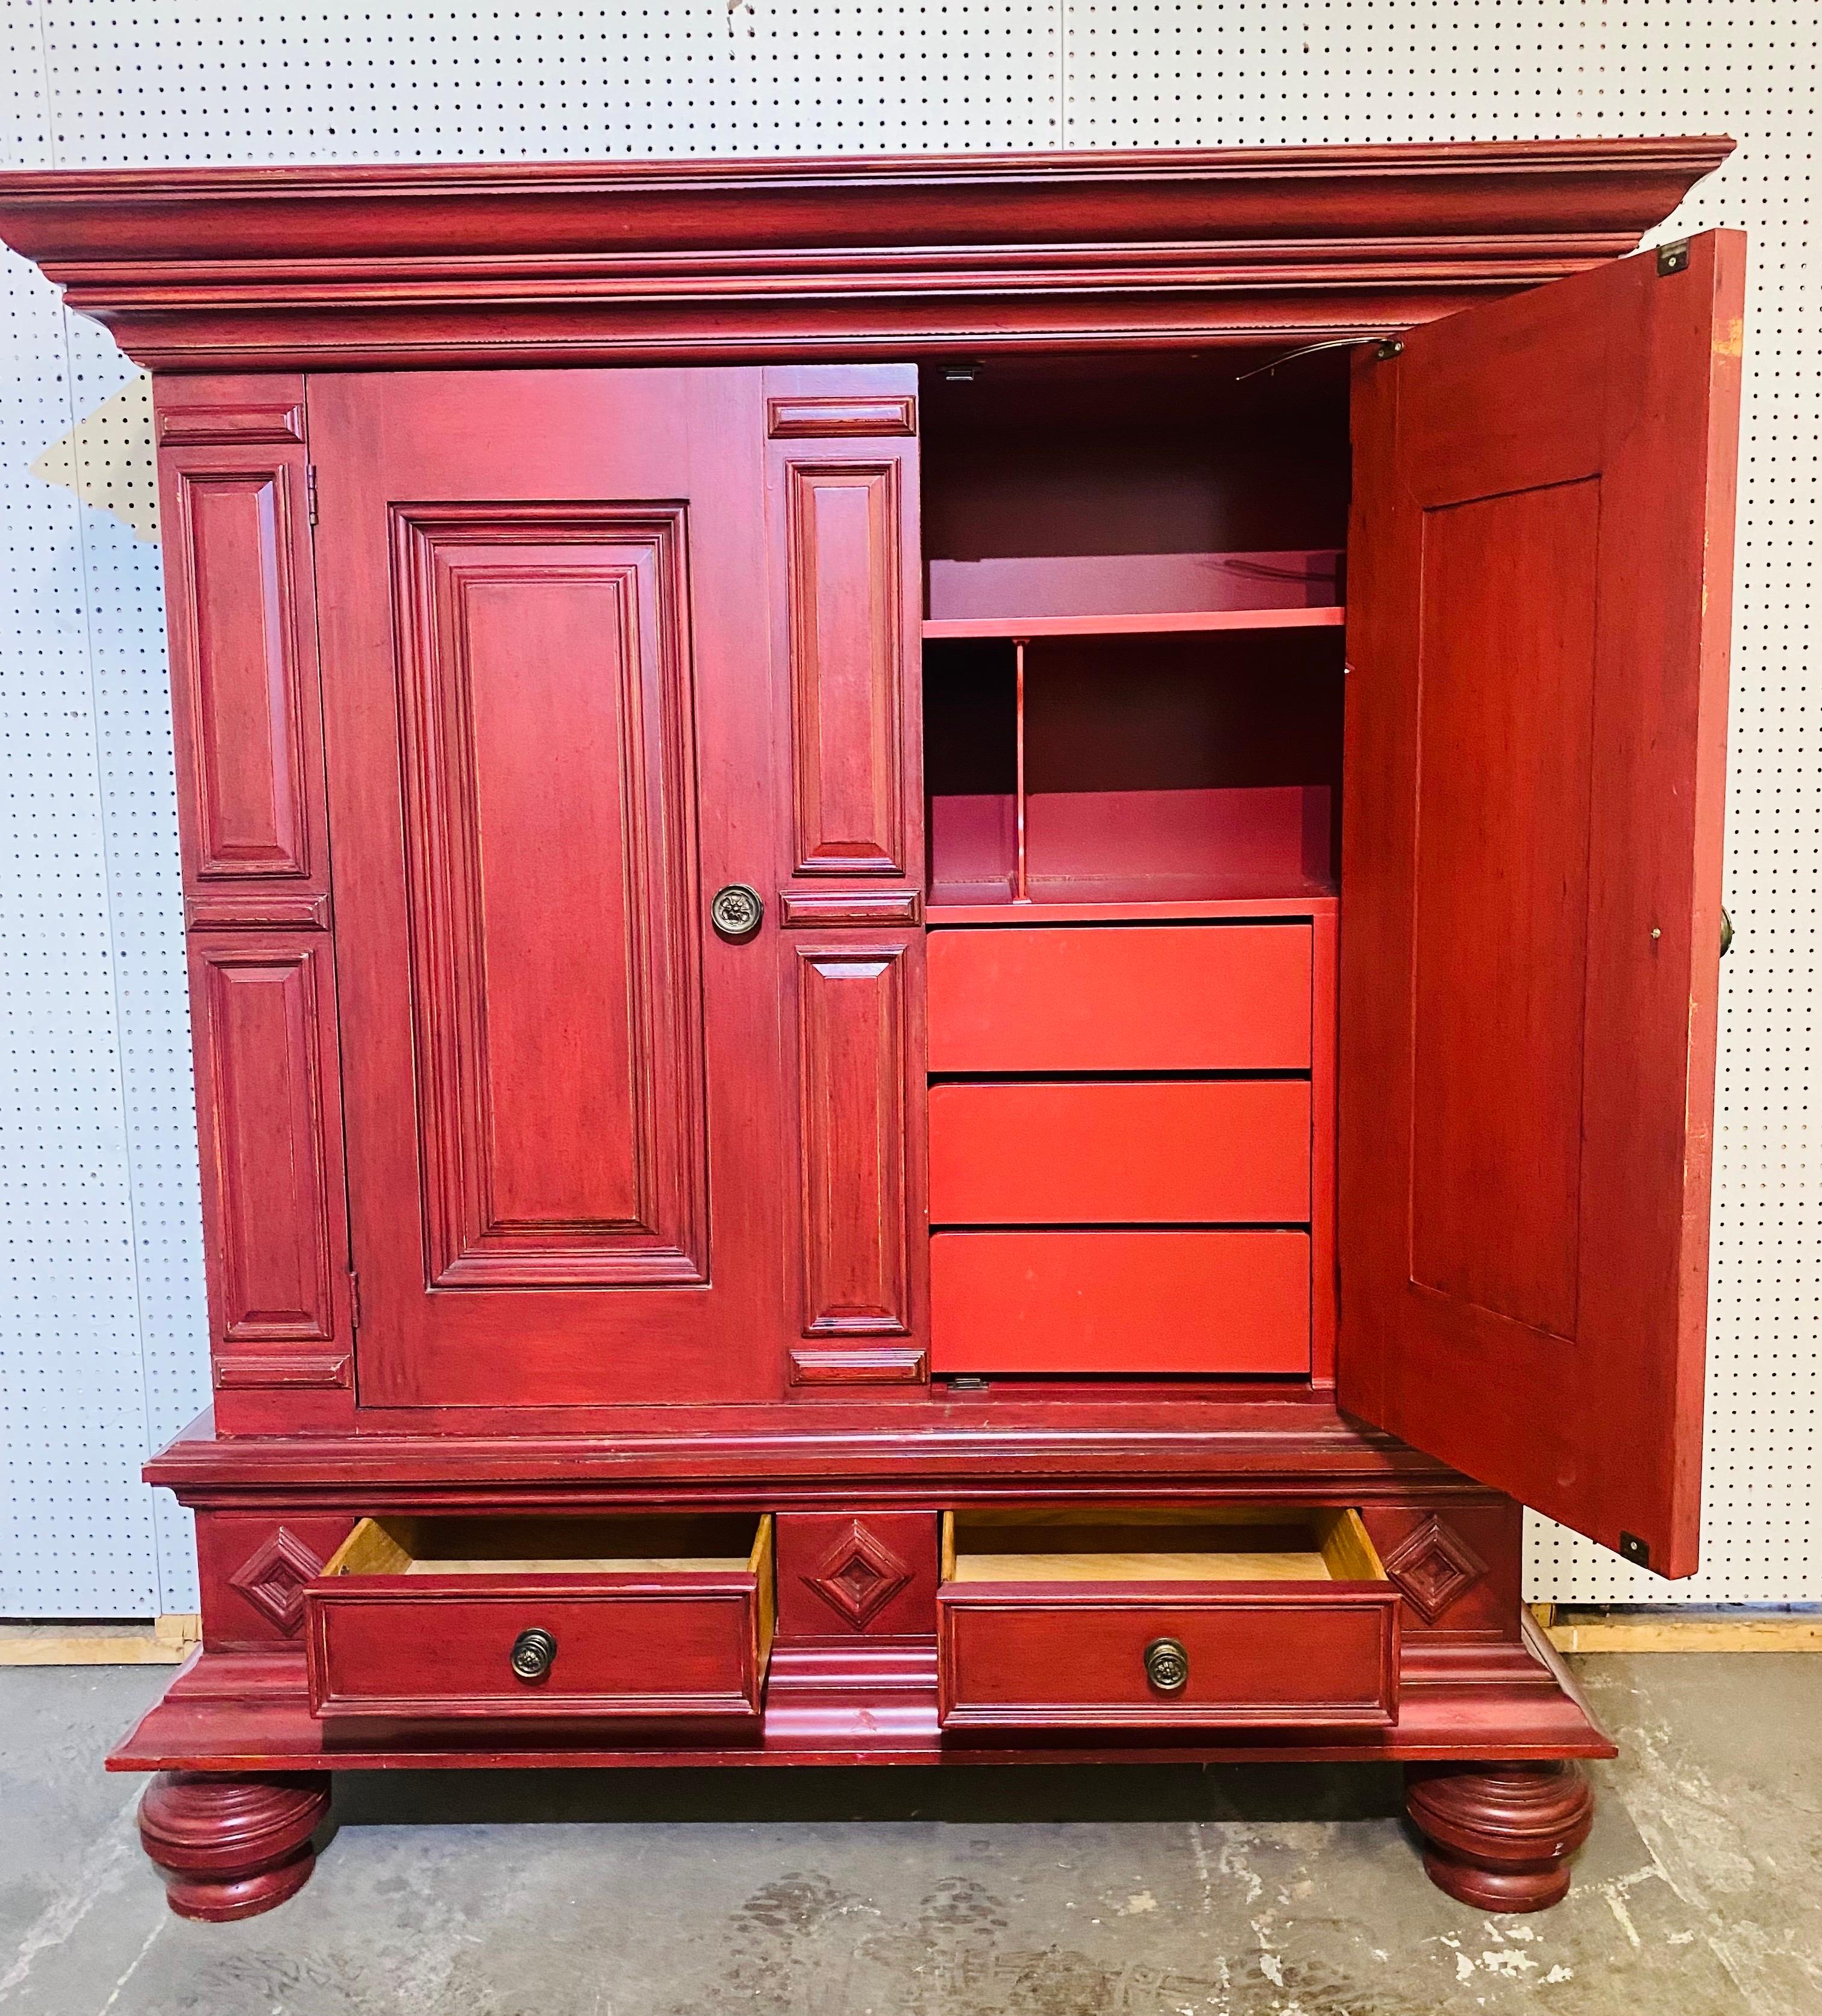 This is a Dutch style two door armoire by milling Road the Baker furniture Company. This two door Dutch style armoire is painted firehouse red and has a custom fitted interior with three drawers and shelving. The armoire stands on four oversized bun